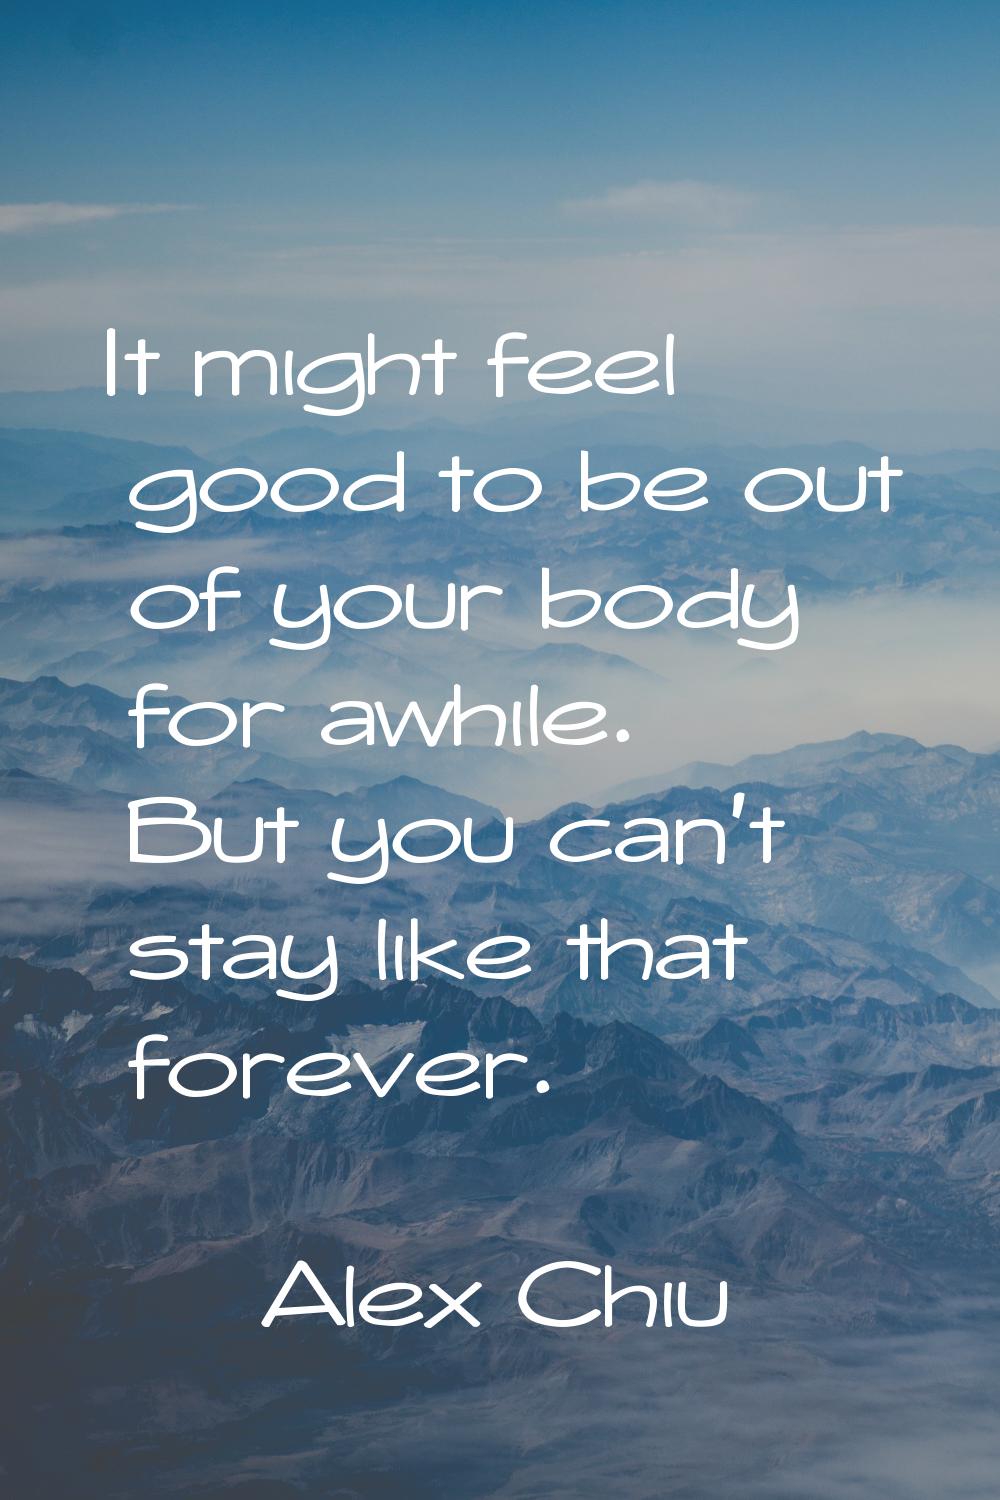 It might feel good to be out of your body for awhile. But you can't stay like that forever.